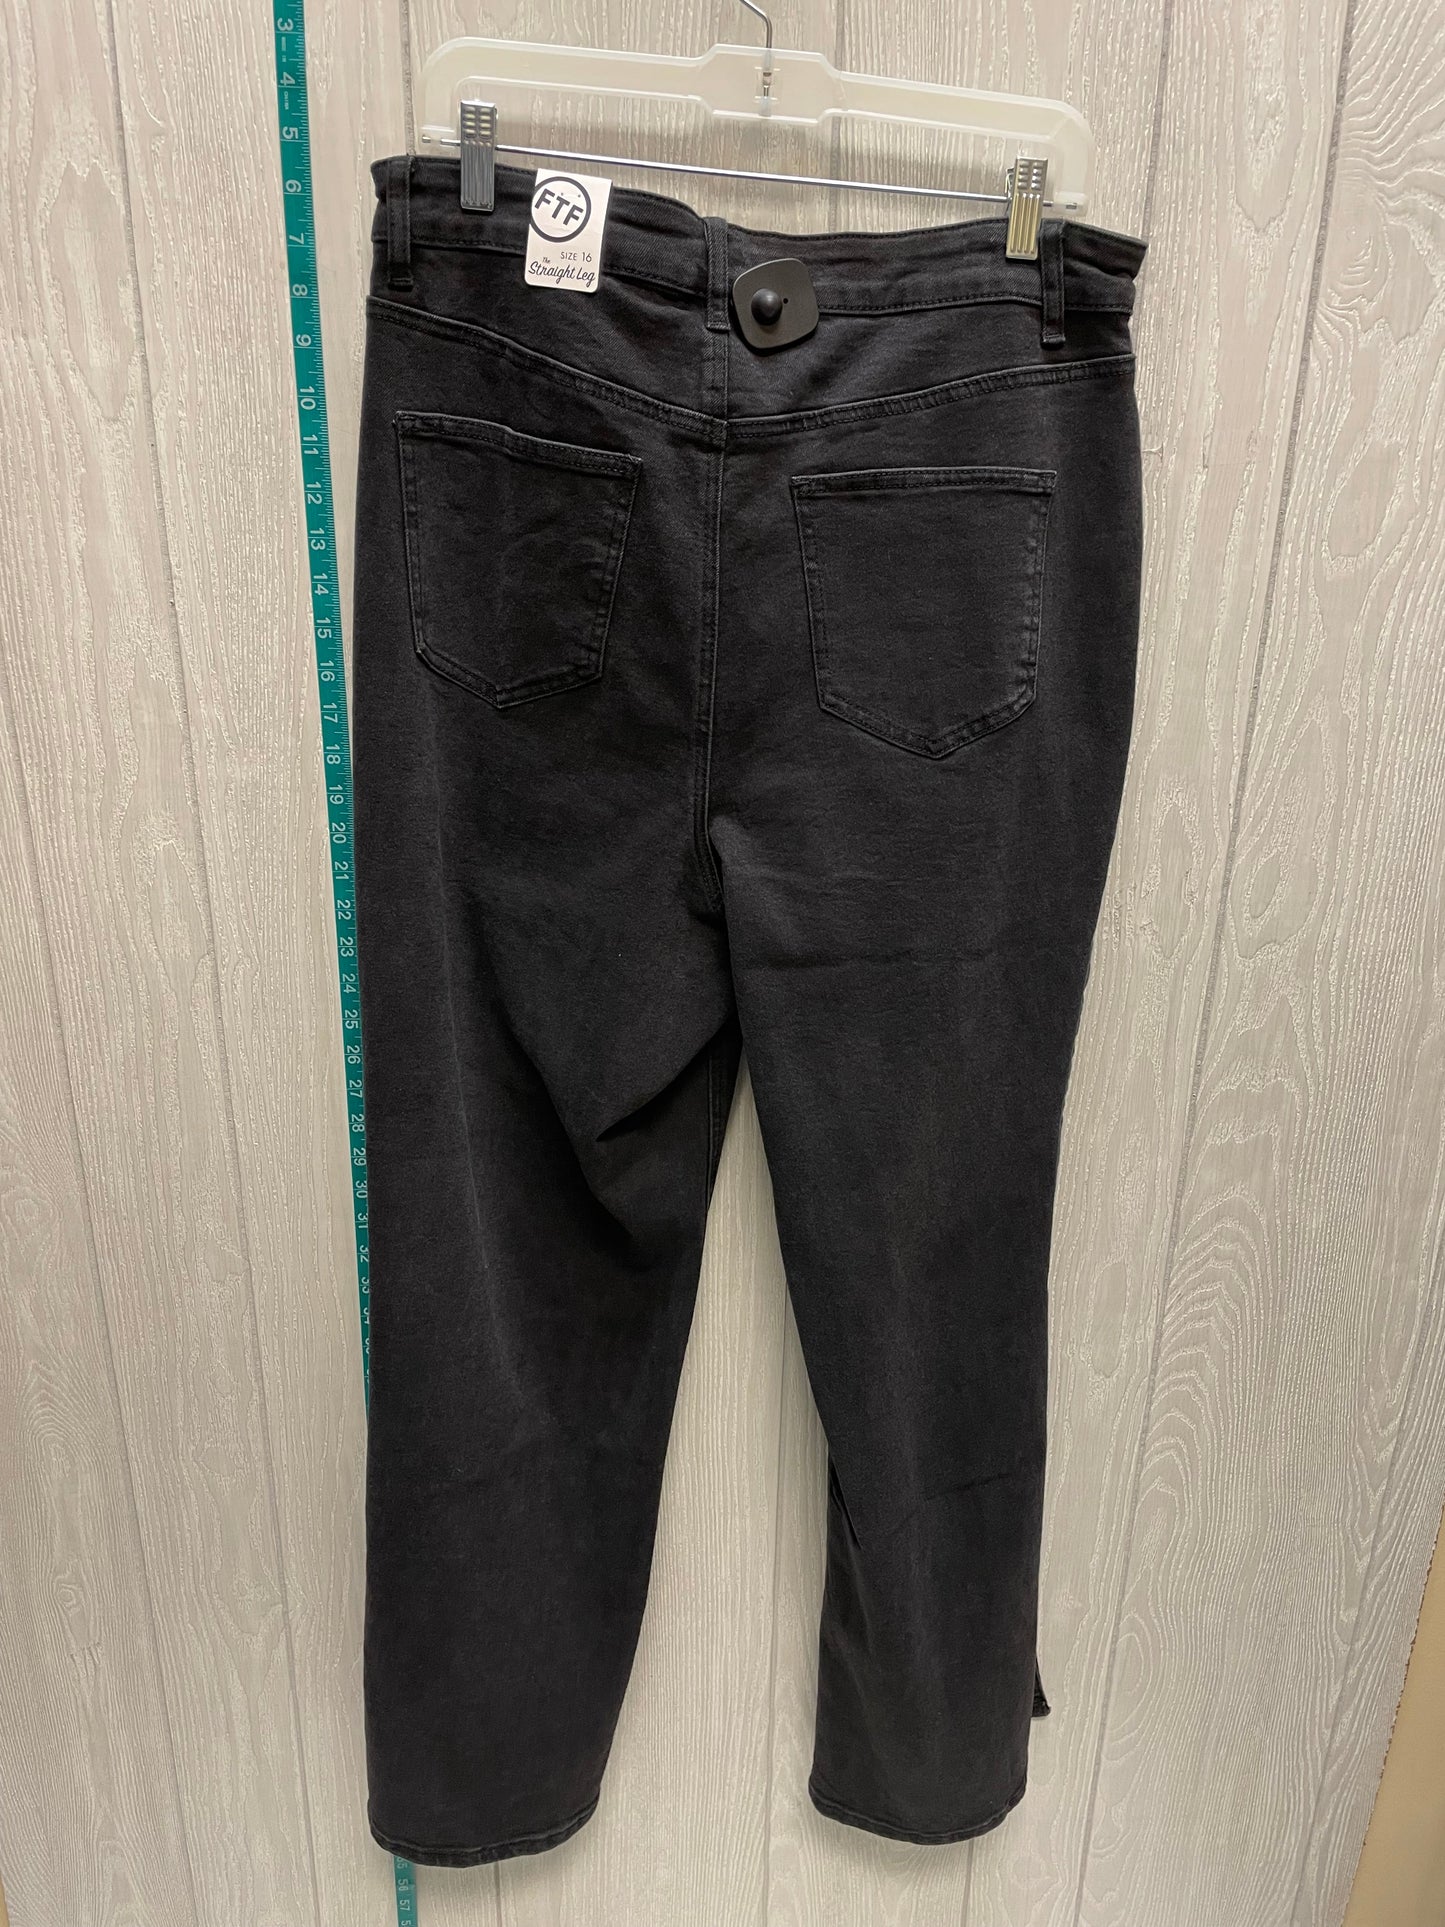 Black Jeans Straight Fashion To Figure, Size 16